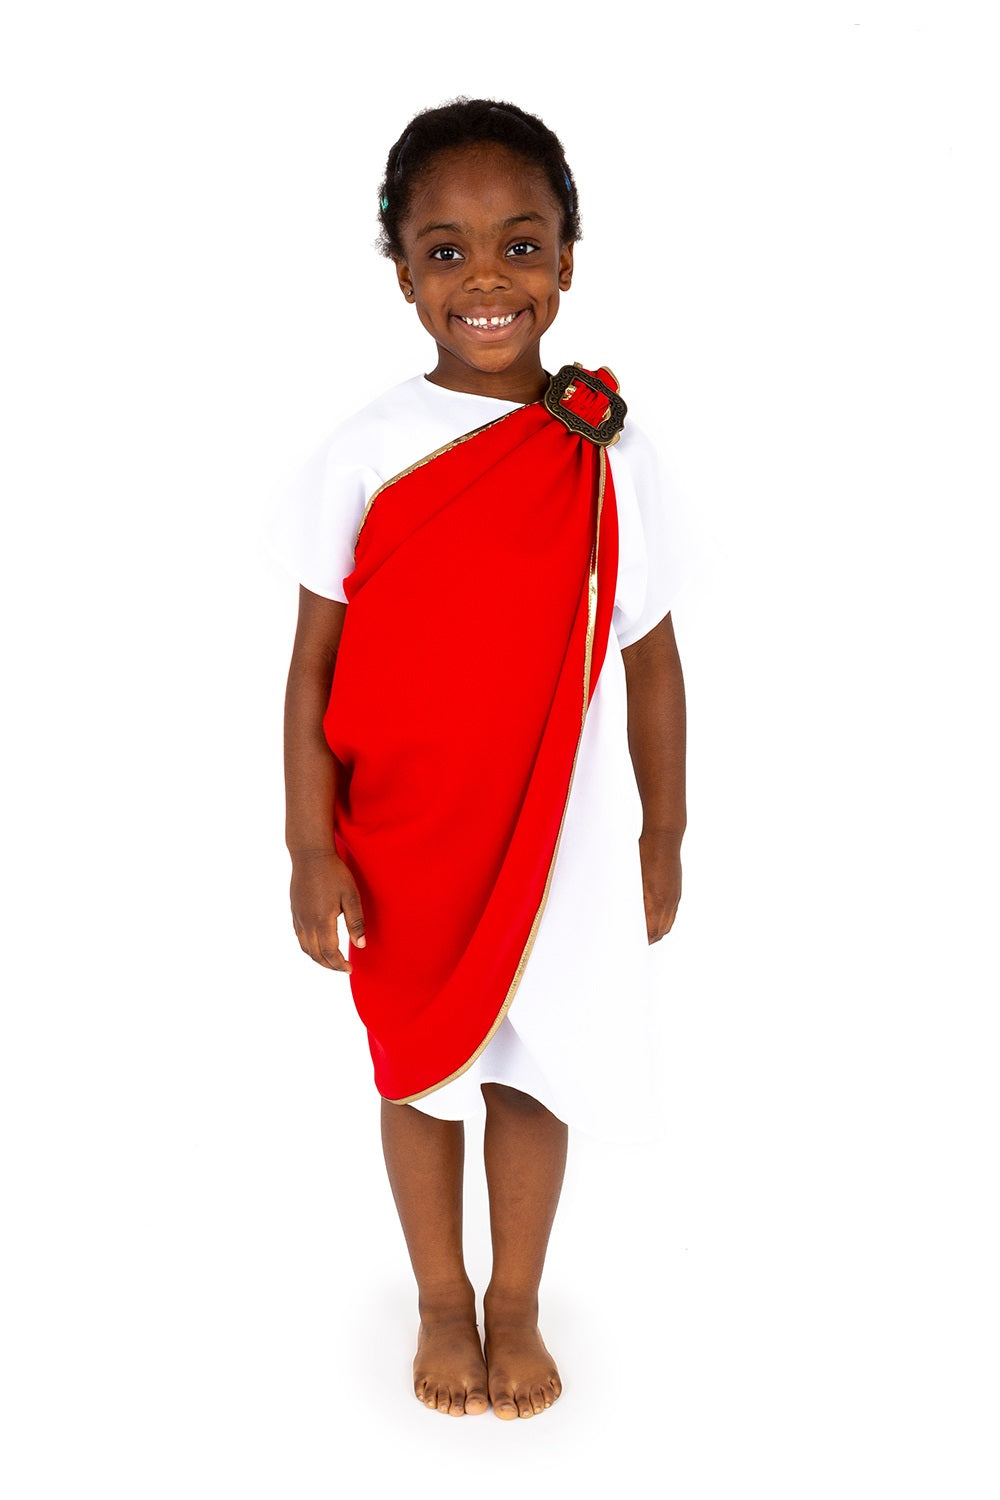 Child's Roman Emperoe costume. White tunic with red toga with a decorative brooch on the shoulder